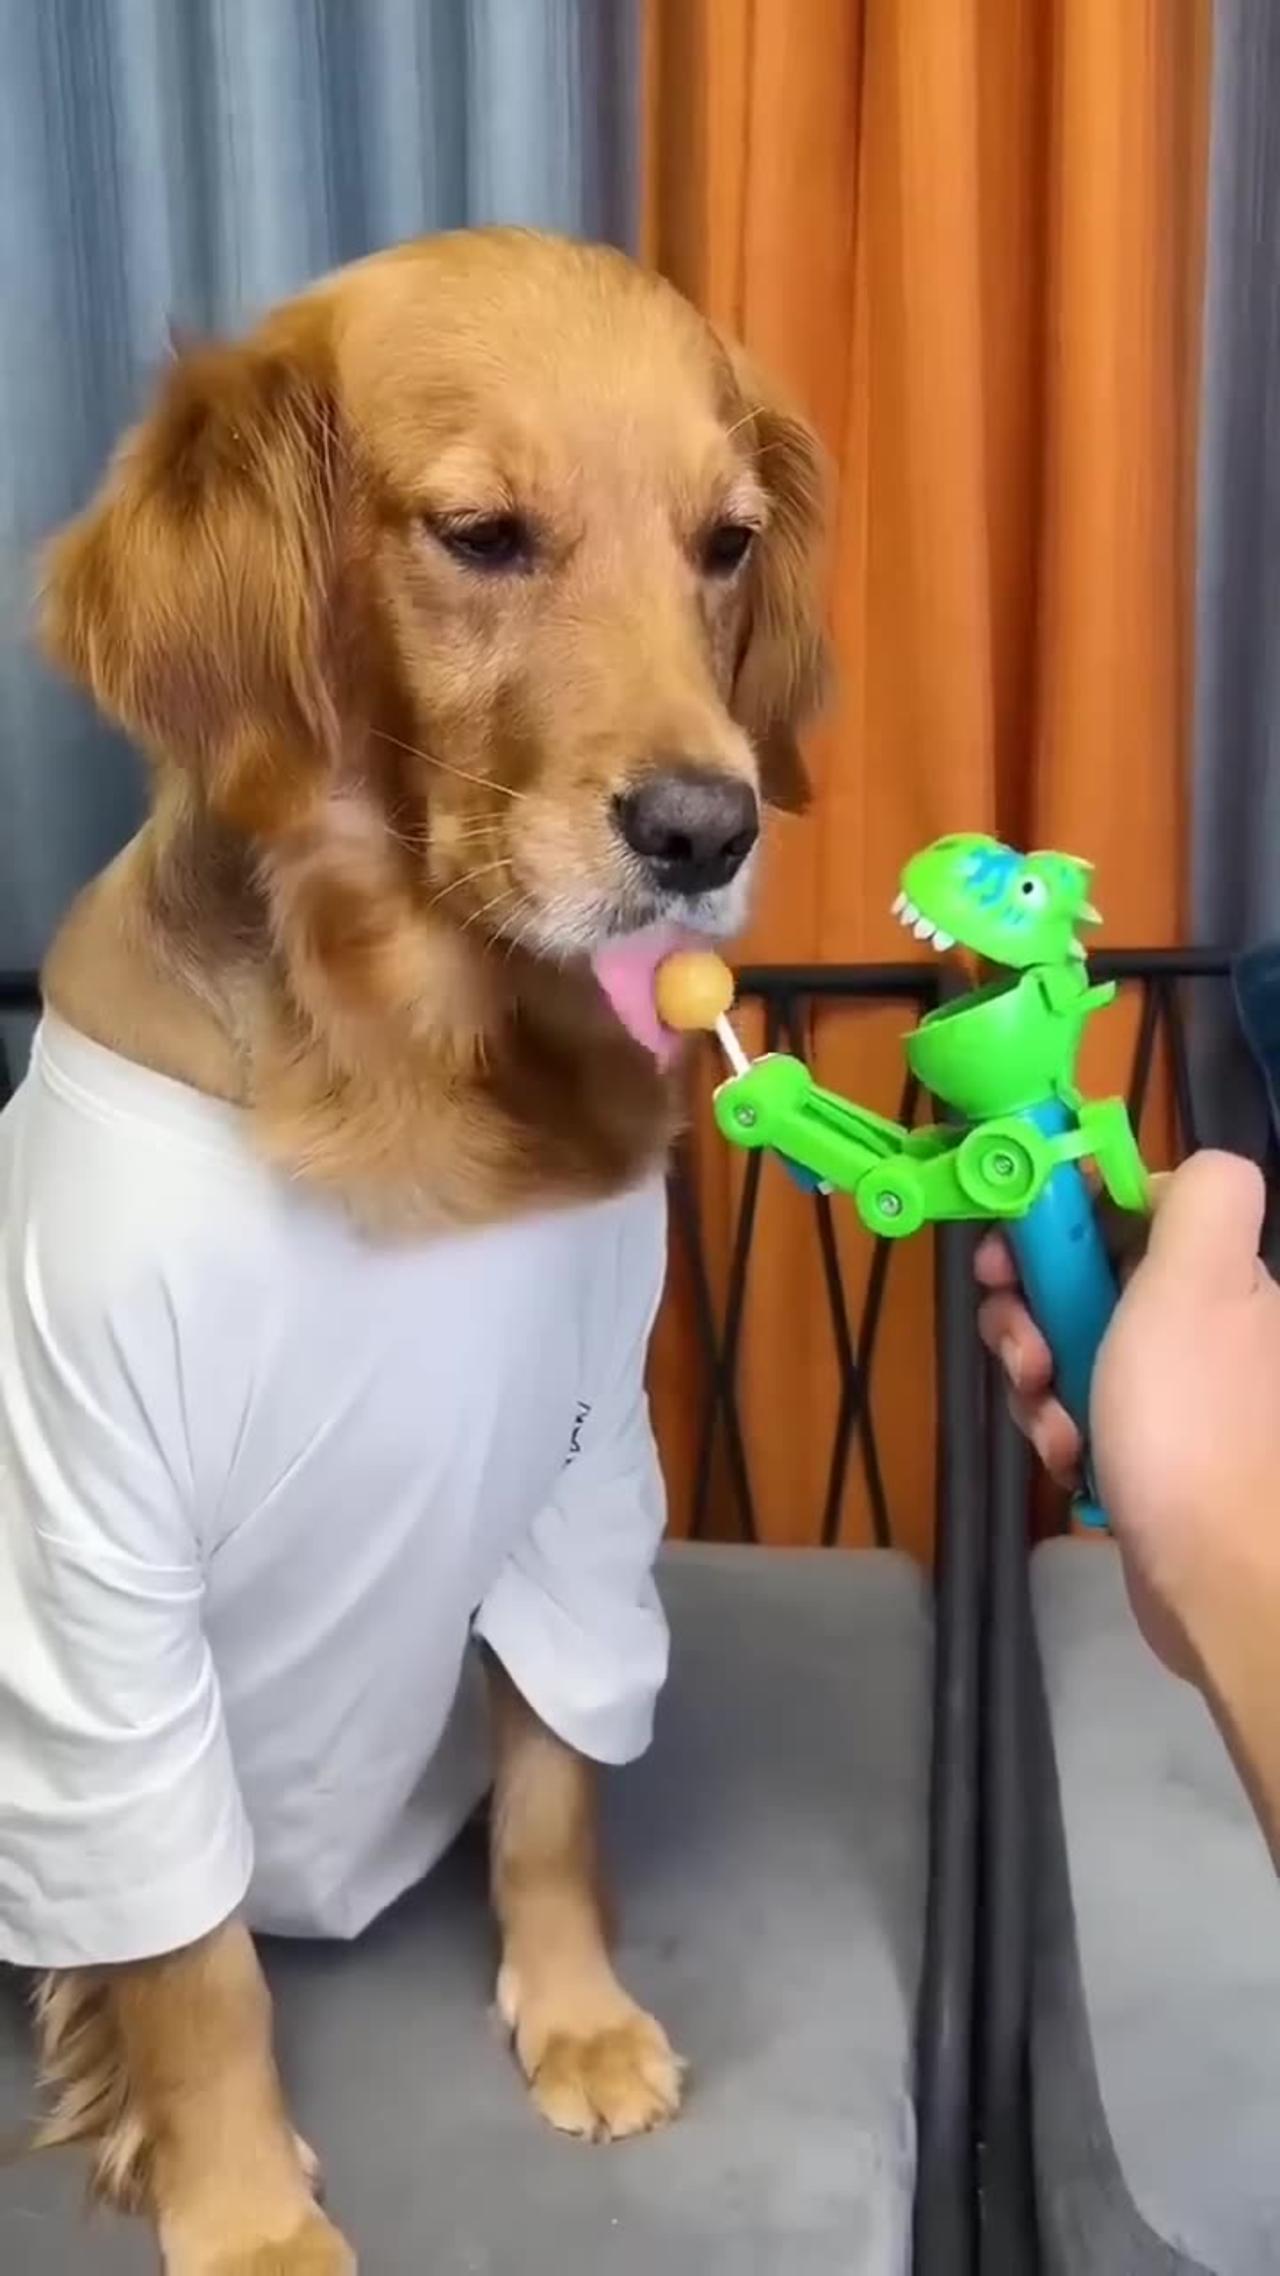 Dog : just because I'm good nature doesn't mean I won bite ! Funny dog video